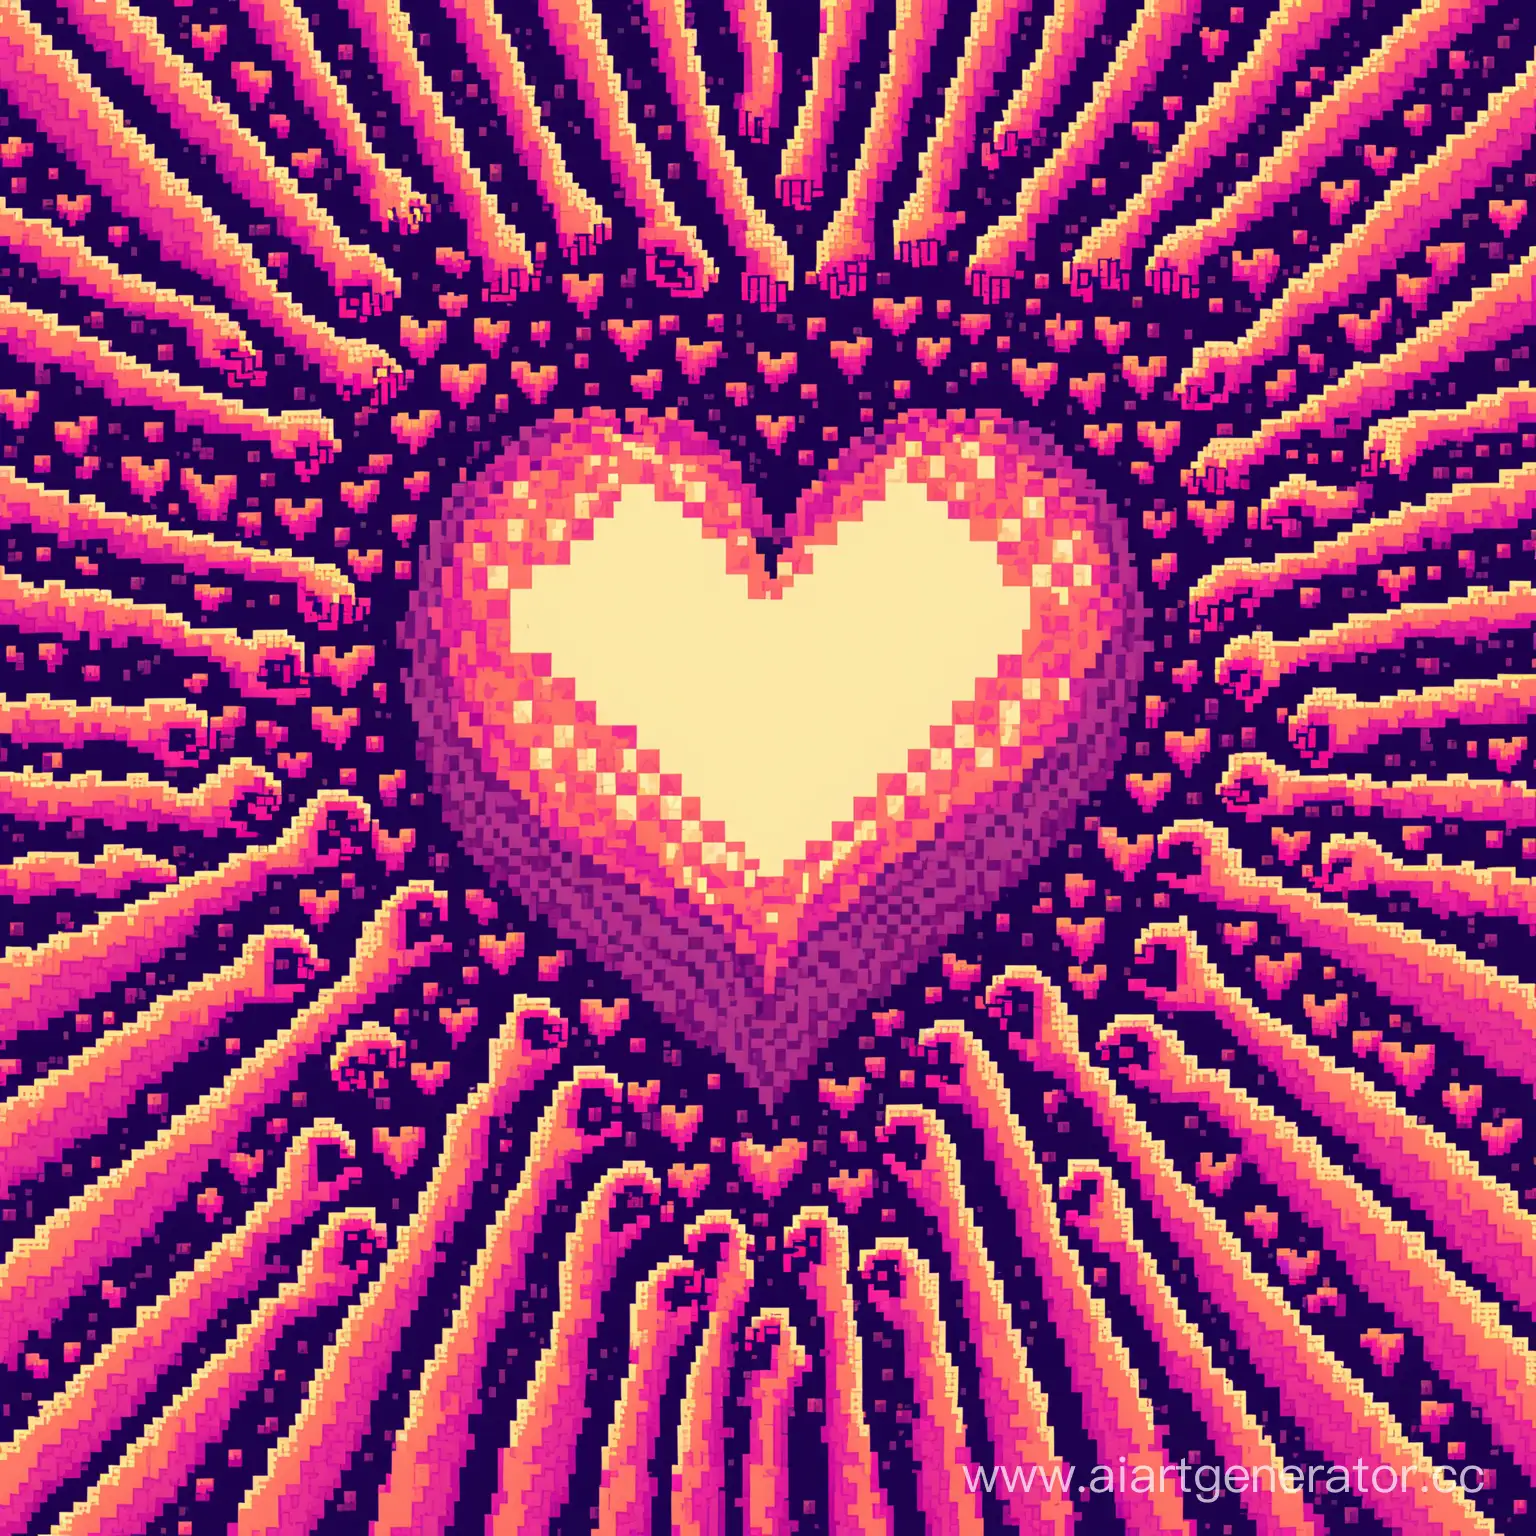 Chaos-in-Pixel-World-Retro-Hands-Holding-Heart